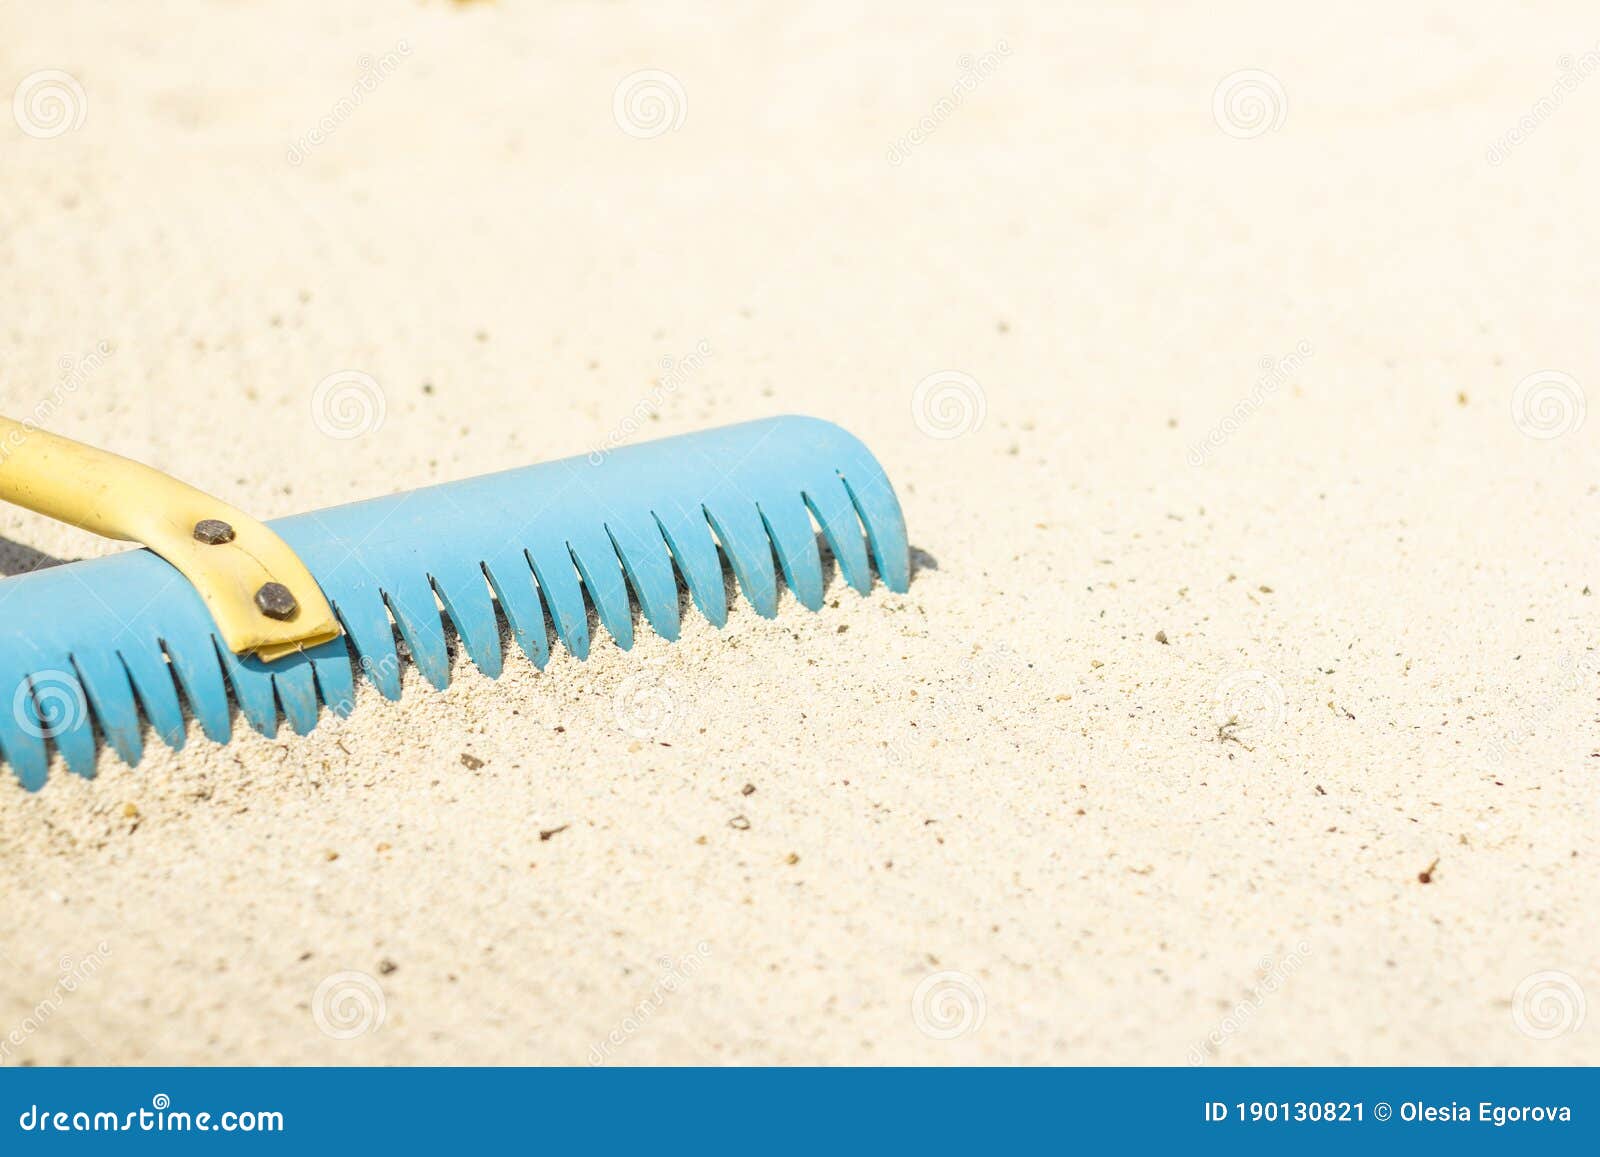 Rake Tooth Stock Photos - Free & Royalty-Free Stock Photos from Dreamstime